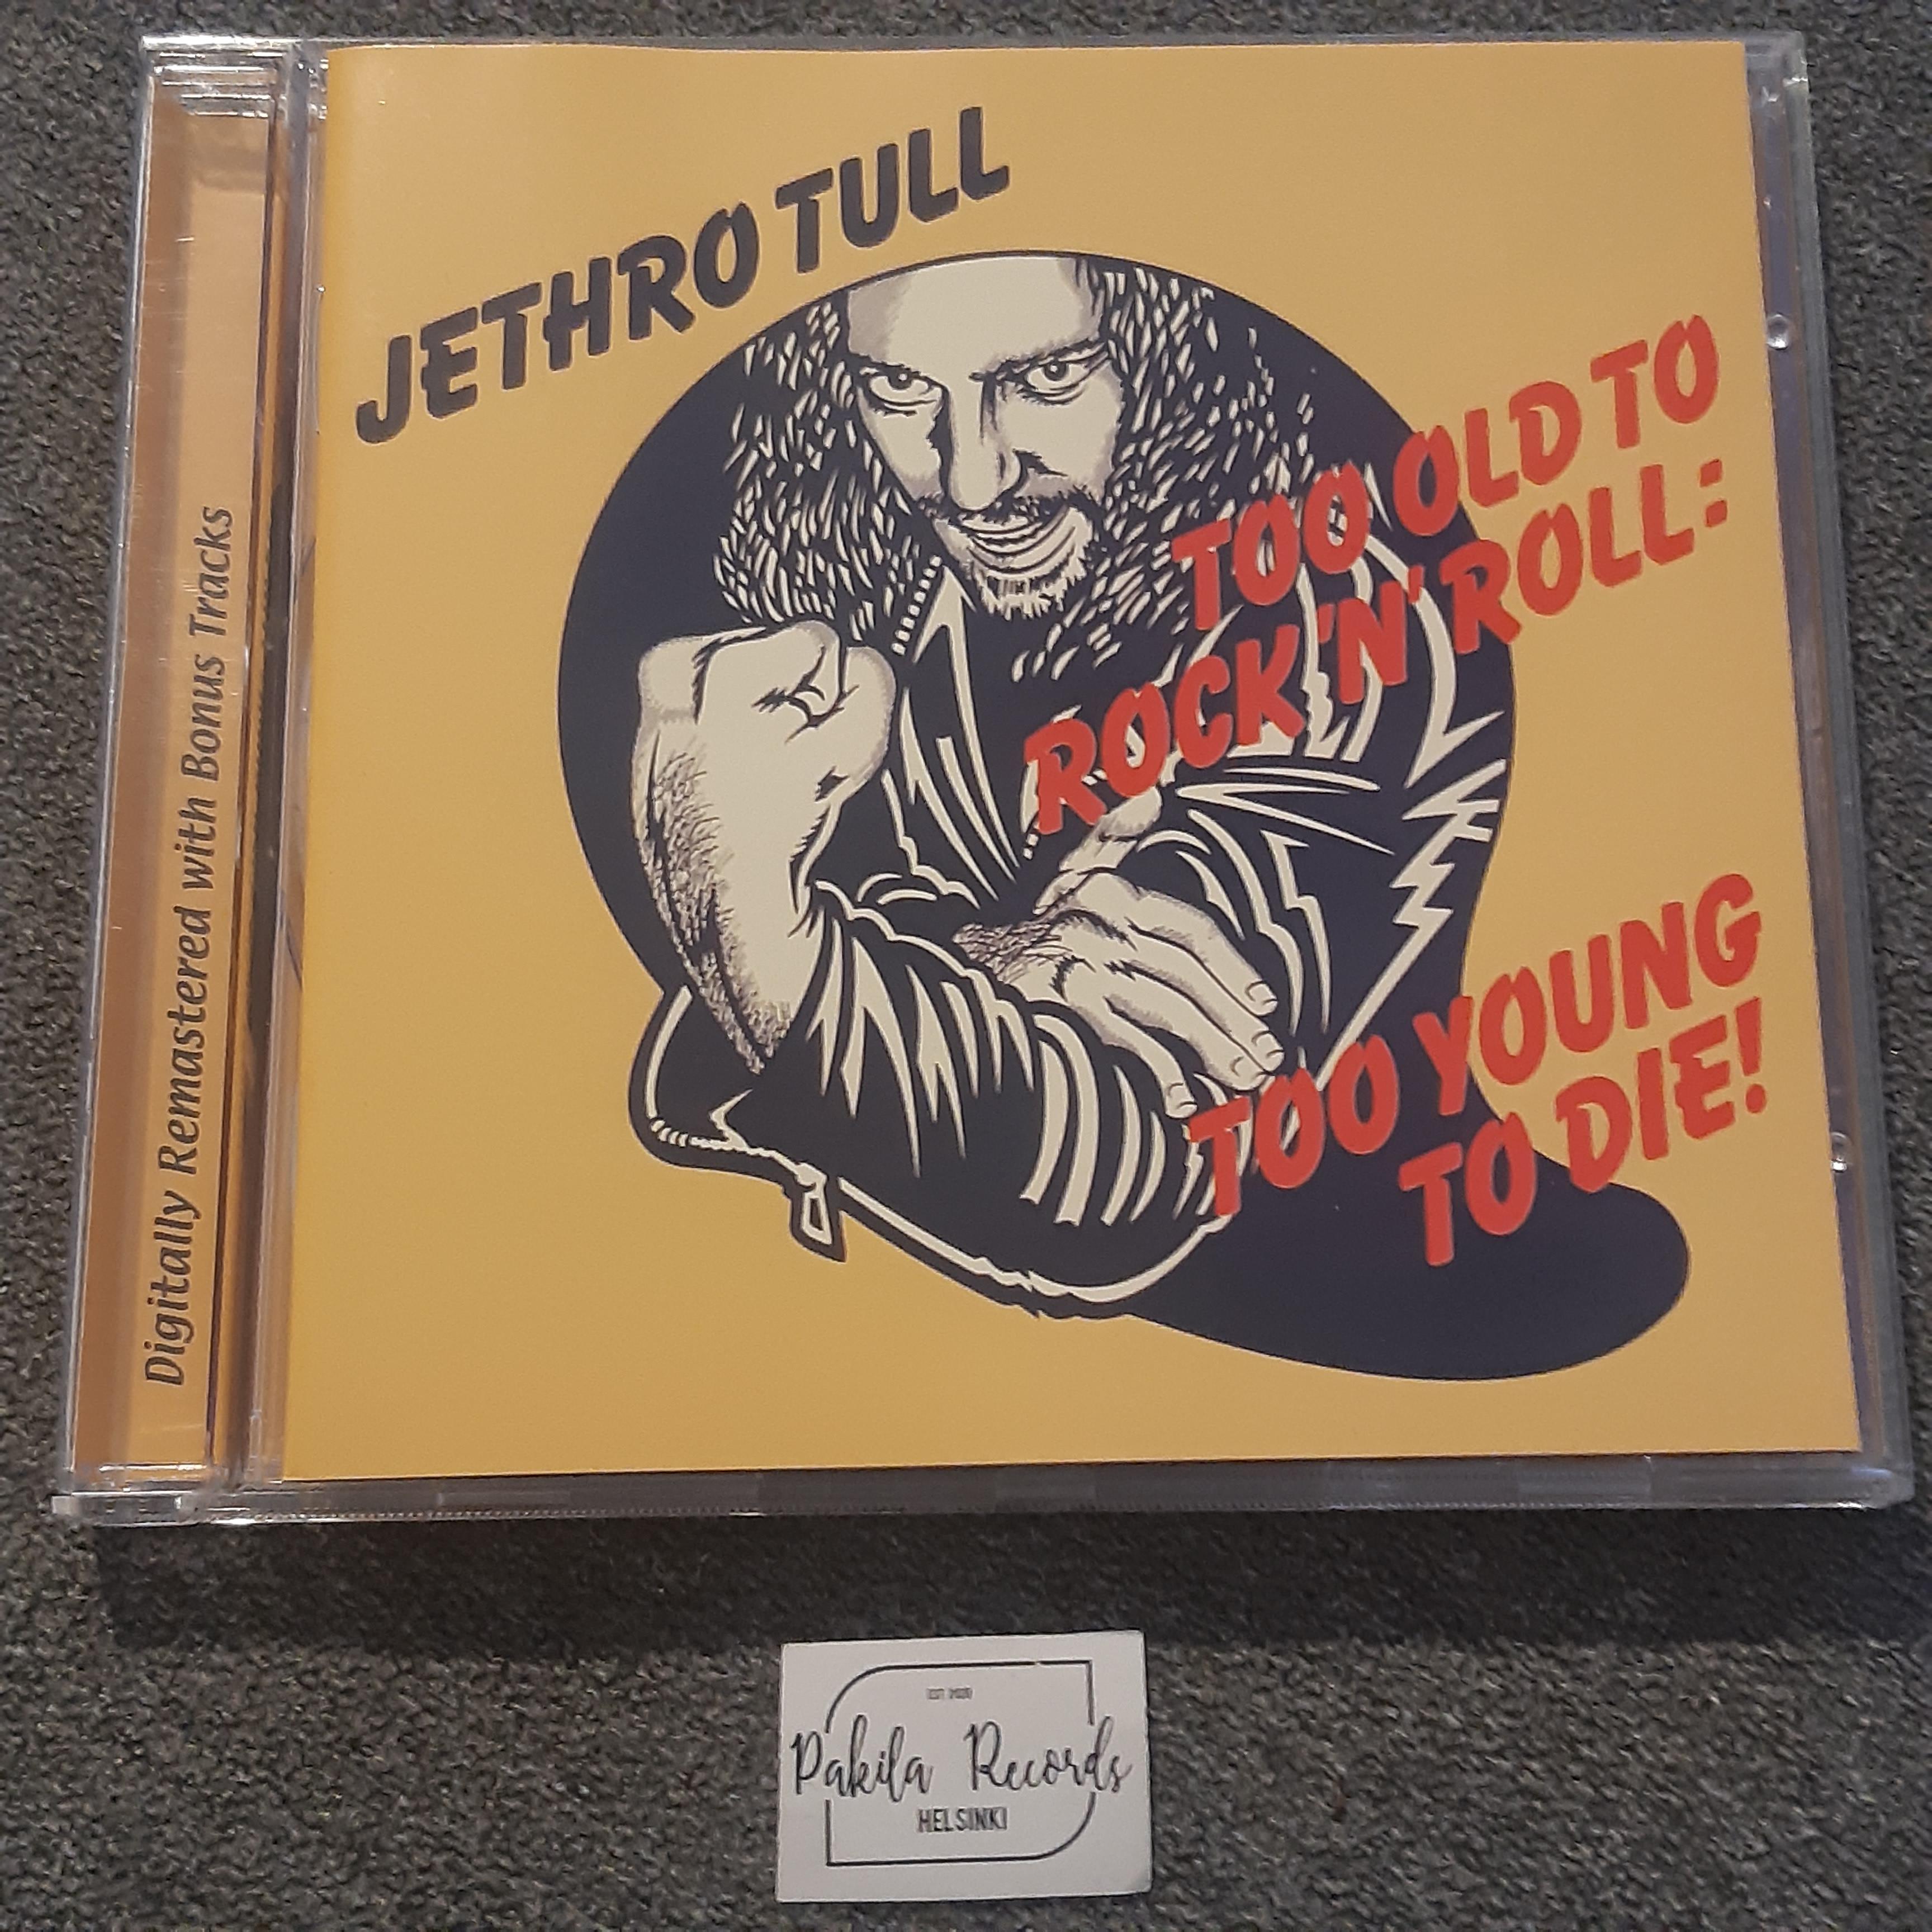 Jethro Tull - Too Old To Rock 'N' Roll: Too Young To Die! - CD (käytetty)